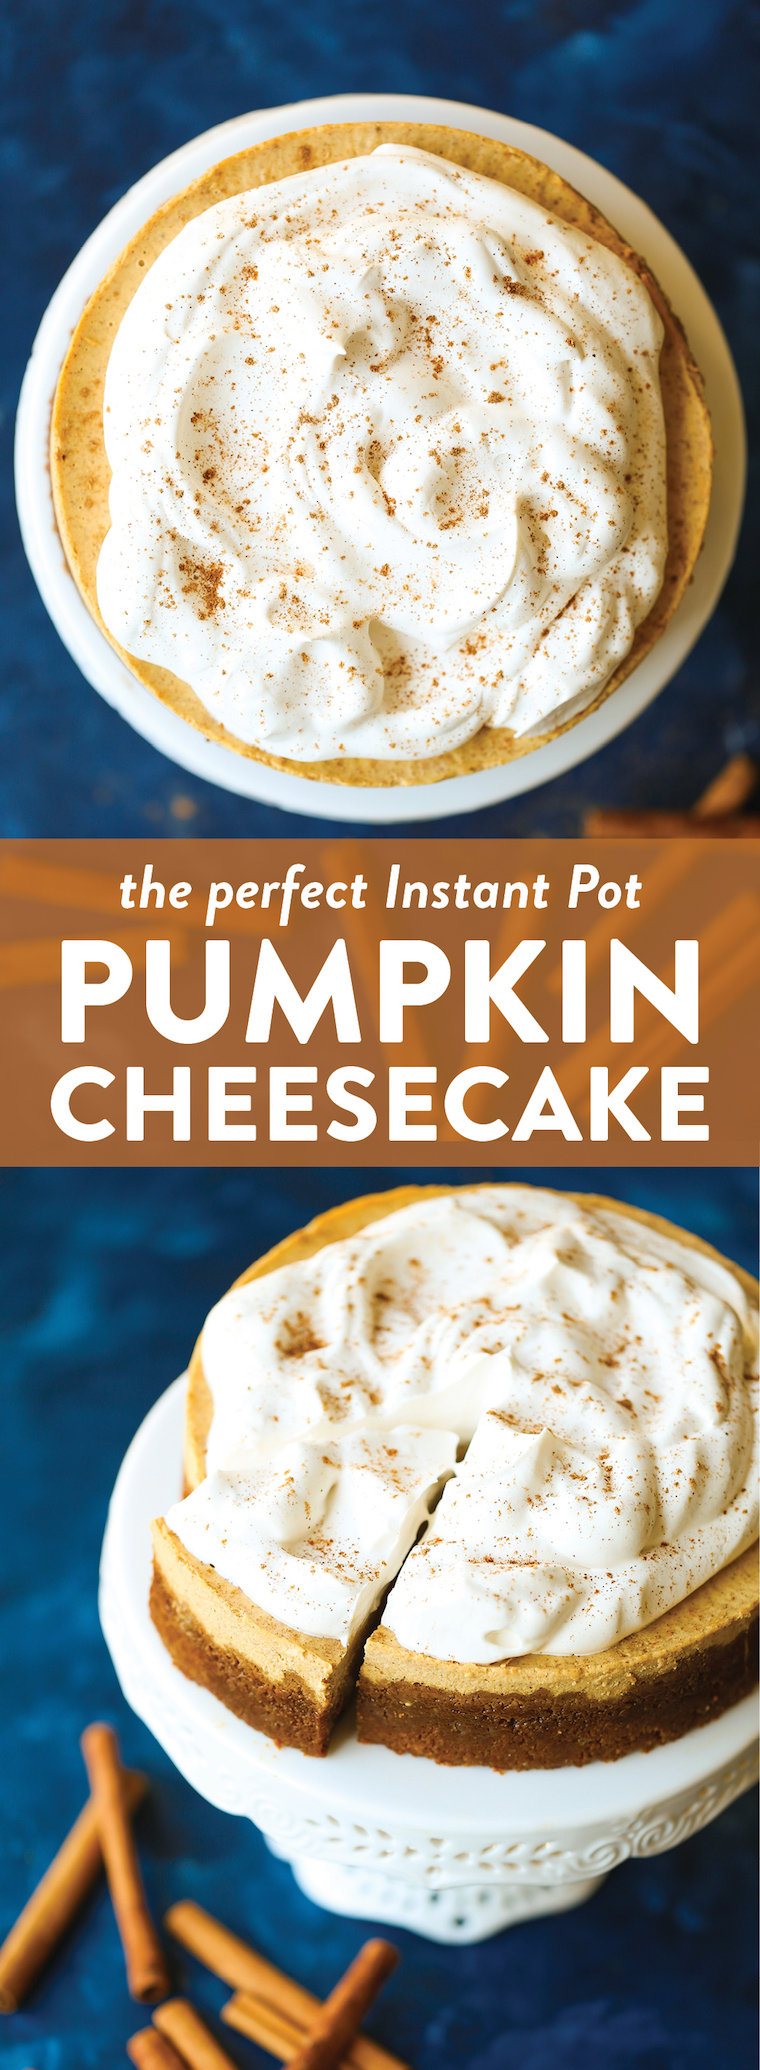 Instant Pot Pumpkin Cheesecake - So amazingly smooth and creamy with the most irresistible gingersnap cookie crust! And you don't even need oven space! WIN!